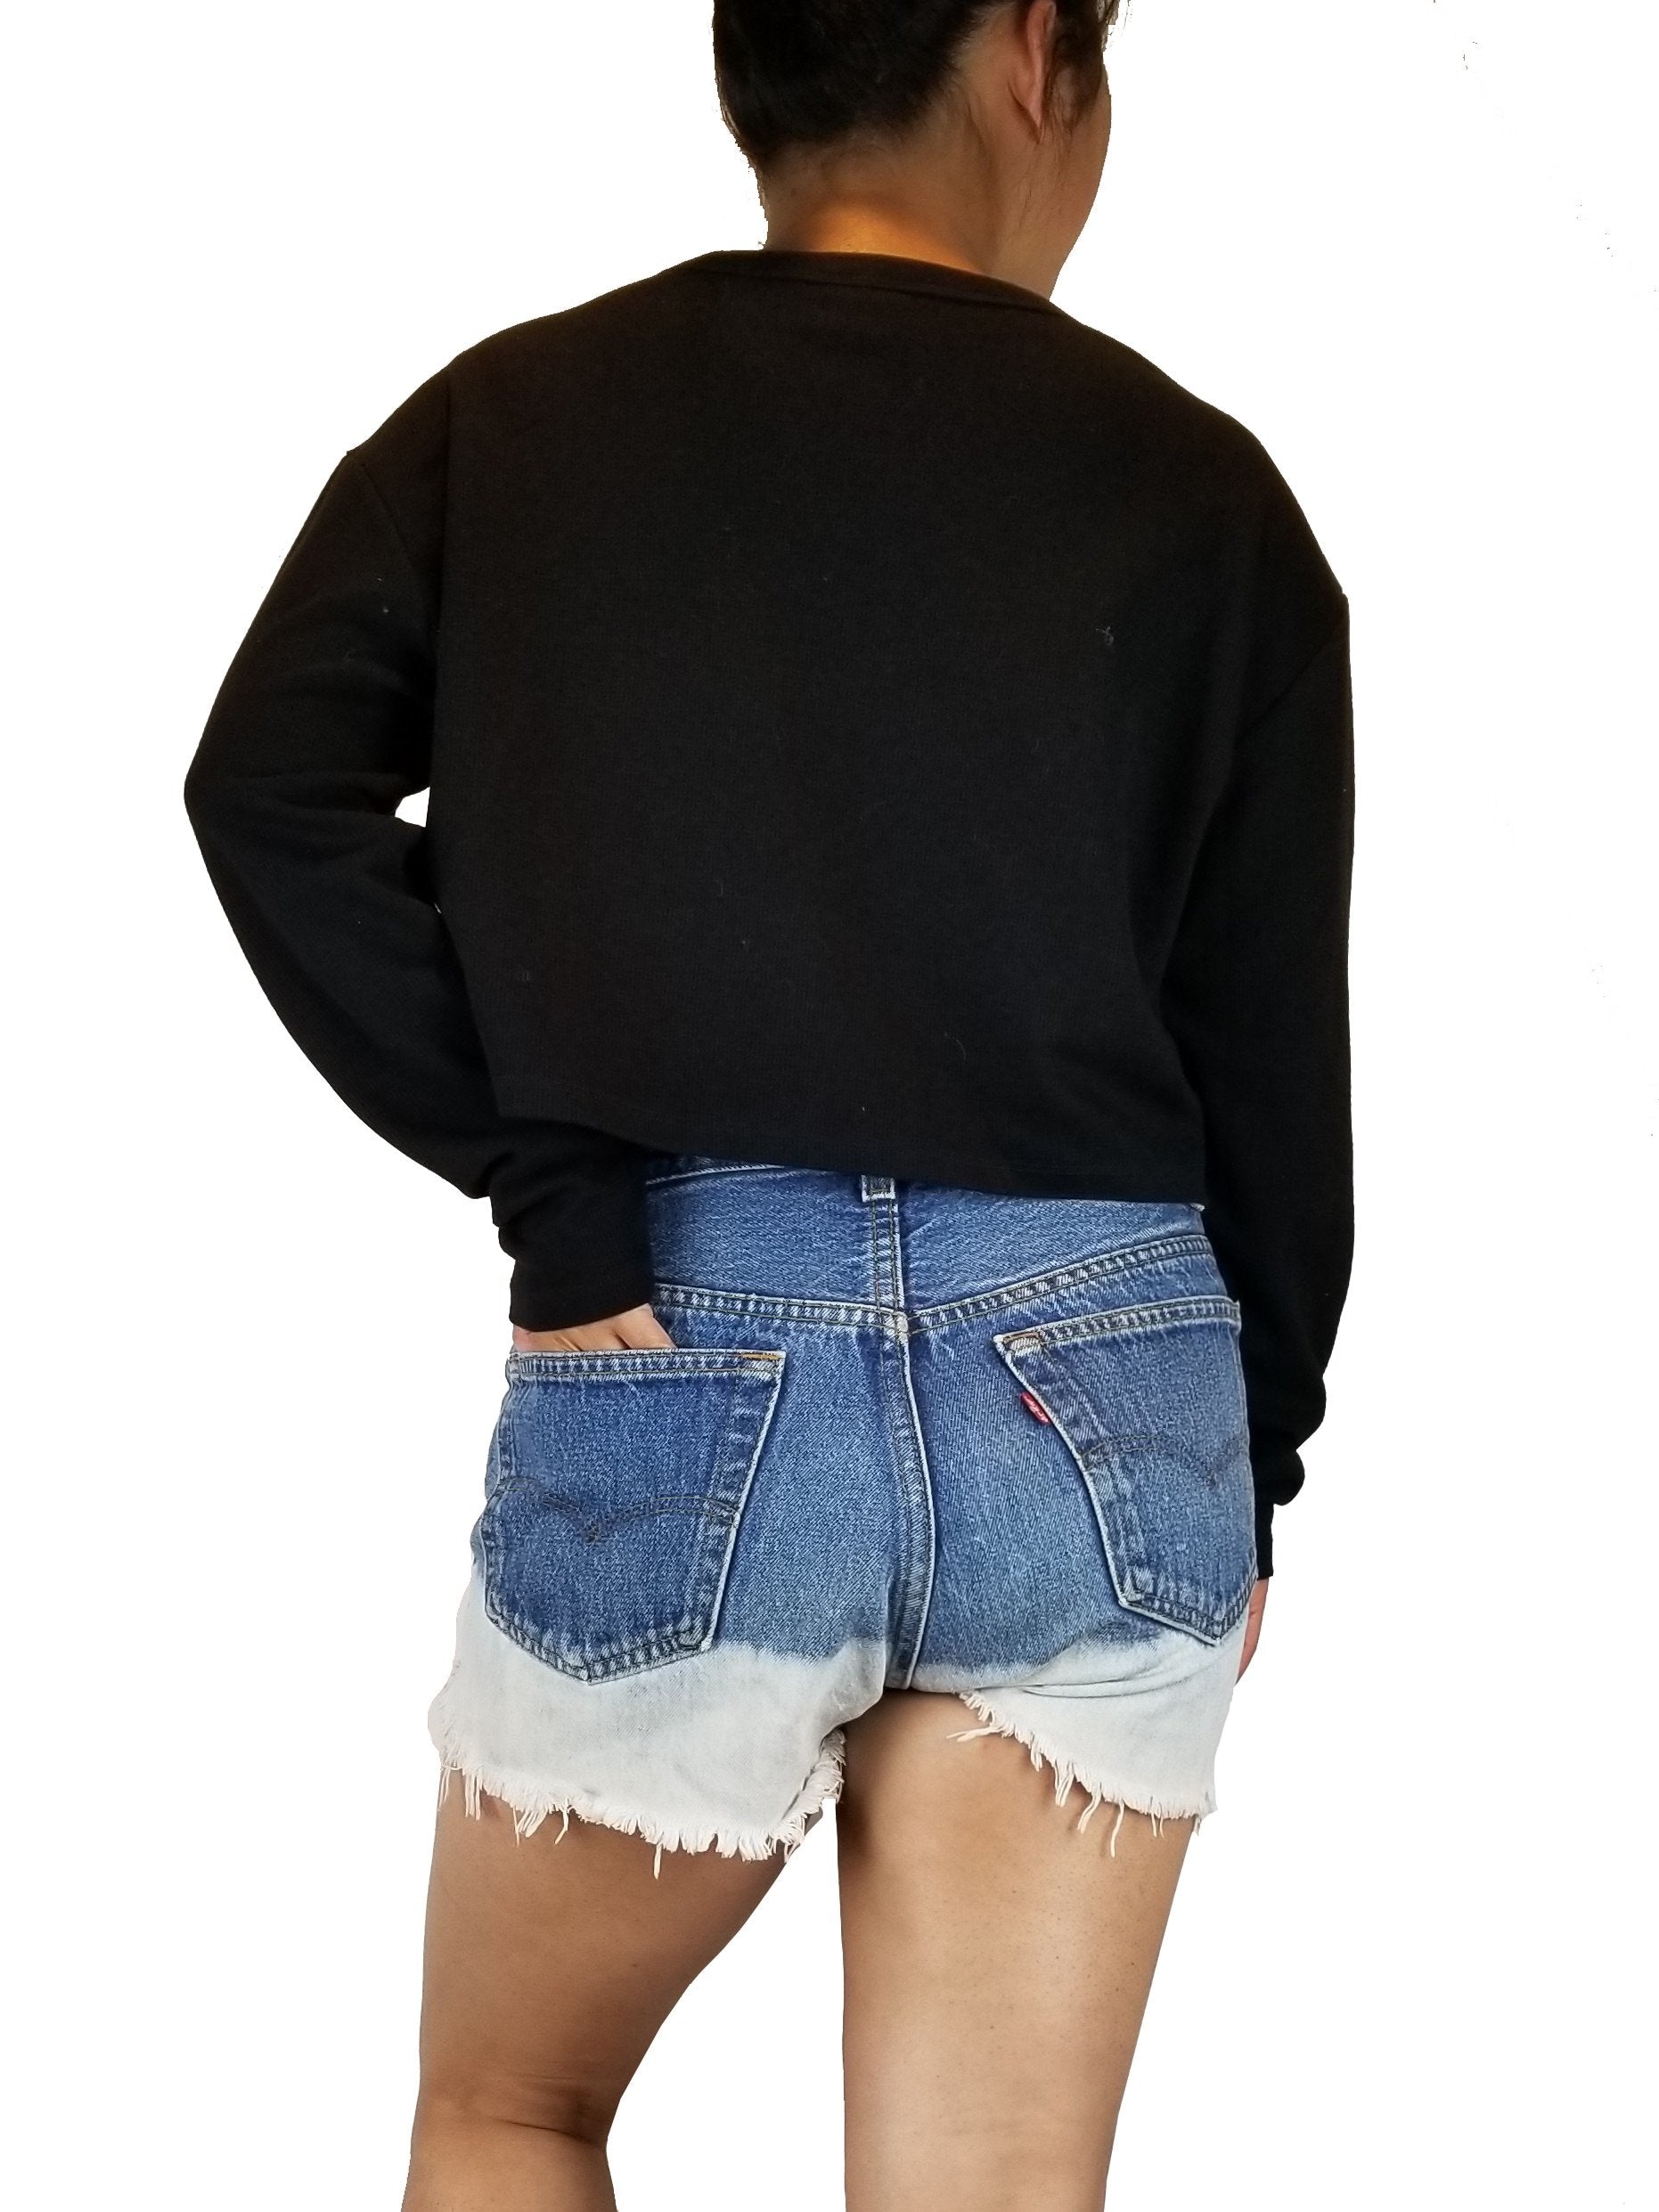 Sunday Best Black Crop Top, High rise shorts with unique design that goes with your unique style, Blue, 100% Cotton, Shorts, jean shorts, women's jean shorts, fashionable shorts, shorts with unique design, women's fourth of July shorts